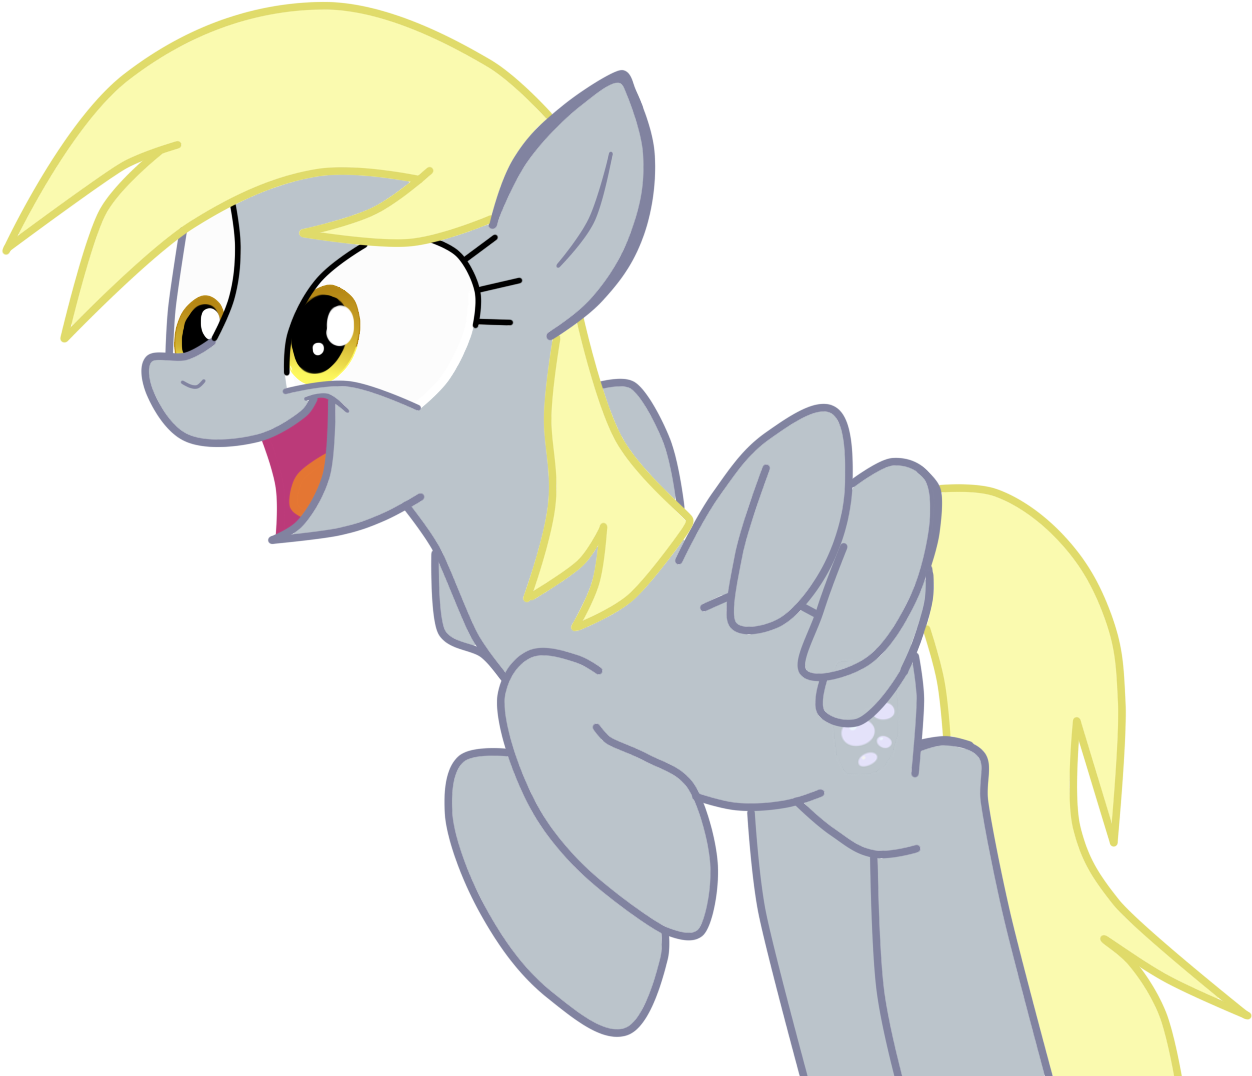 Open-mouth Derpy - Derpy Hooves Transparent Background (1320x1260)